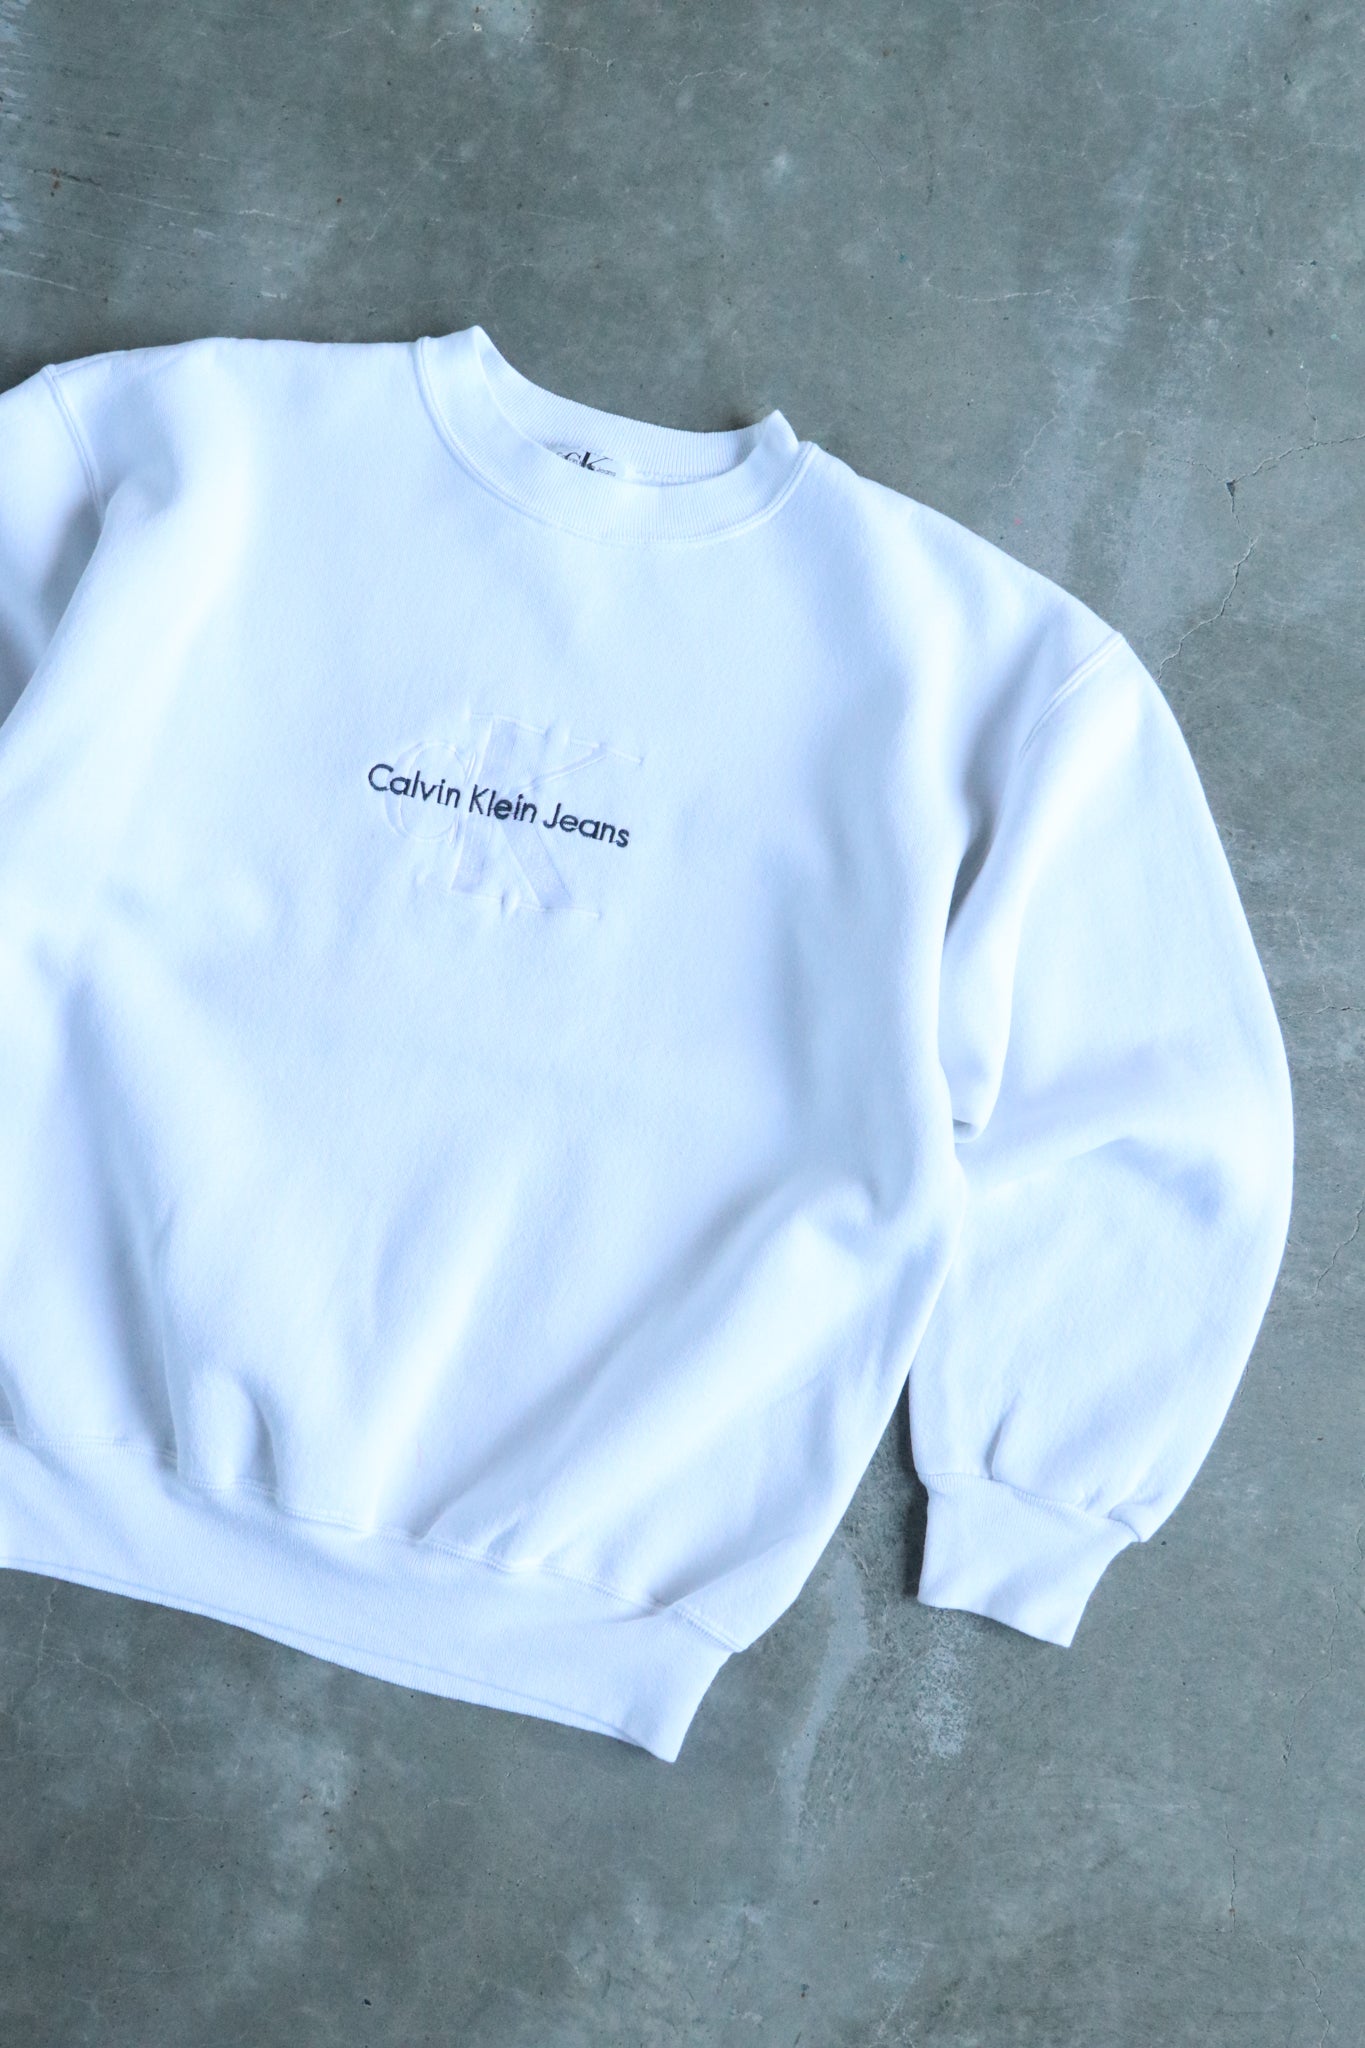 Vintage Bootleg Calvin Klein Embroidered Sweater Small